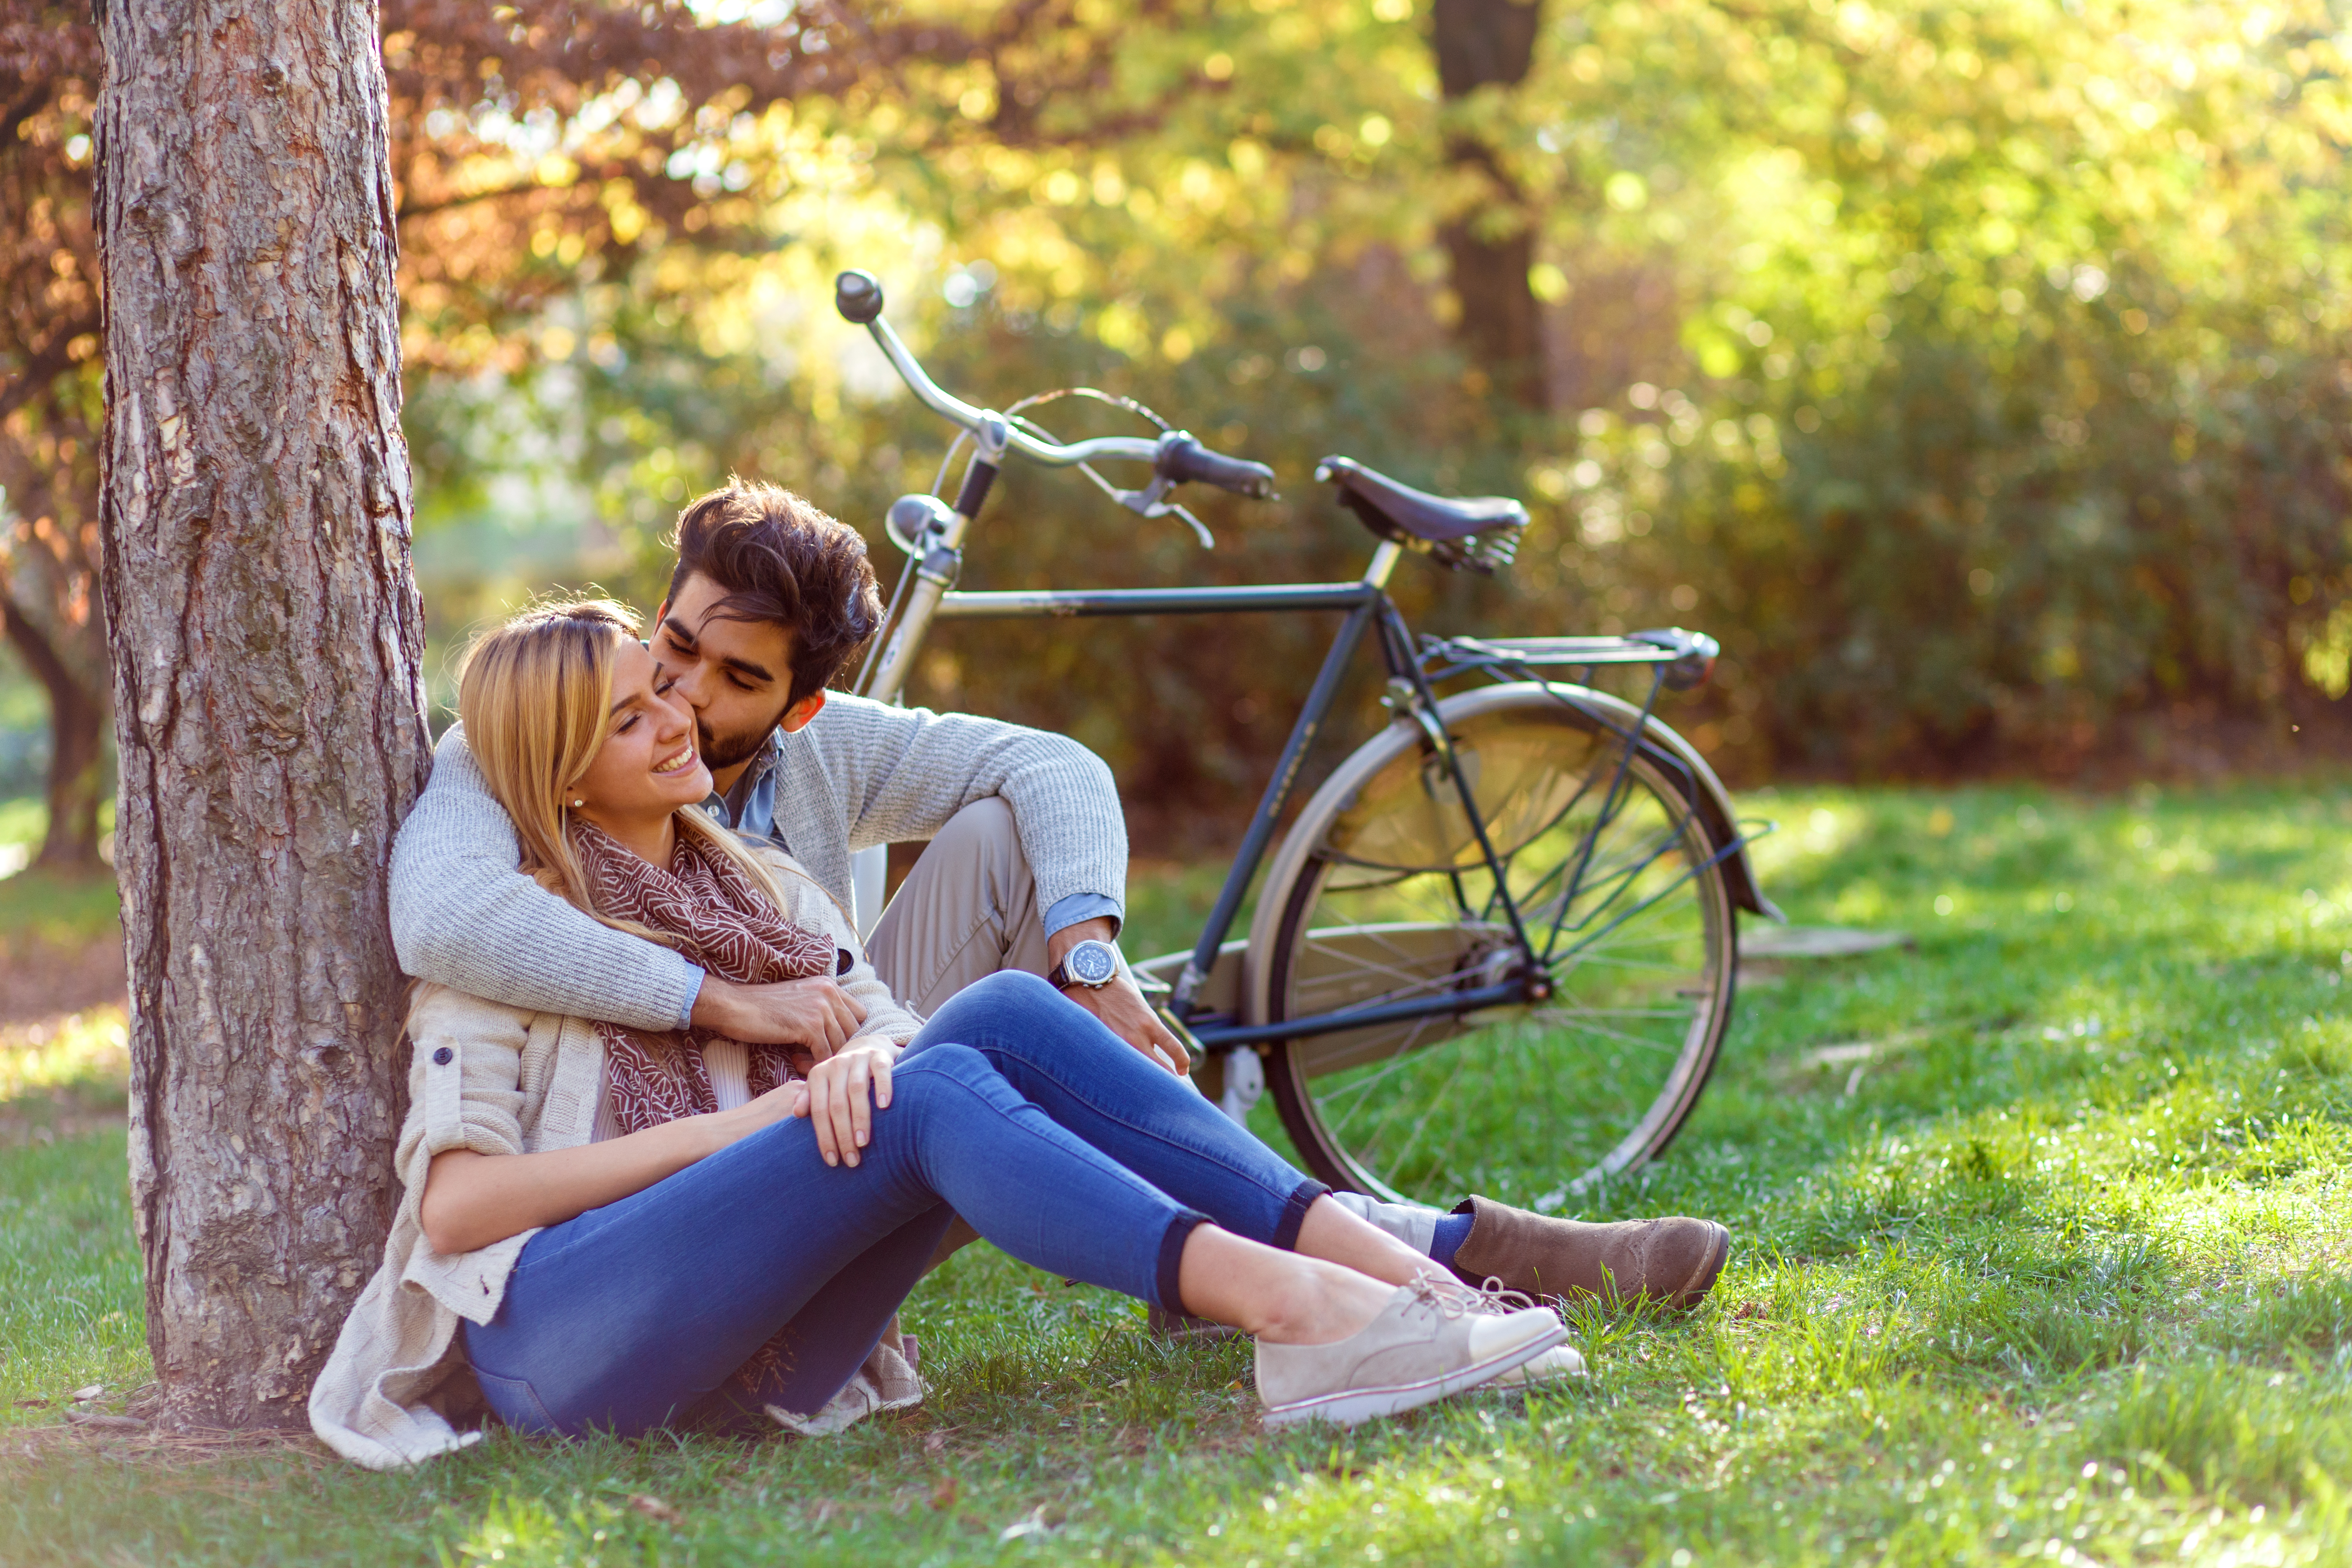 A man kissing his girlfriend while sitting in the park | Source: Shutterstock